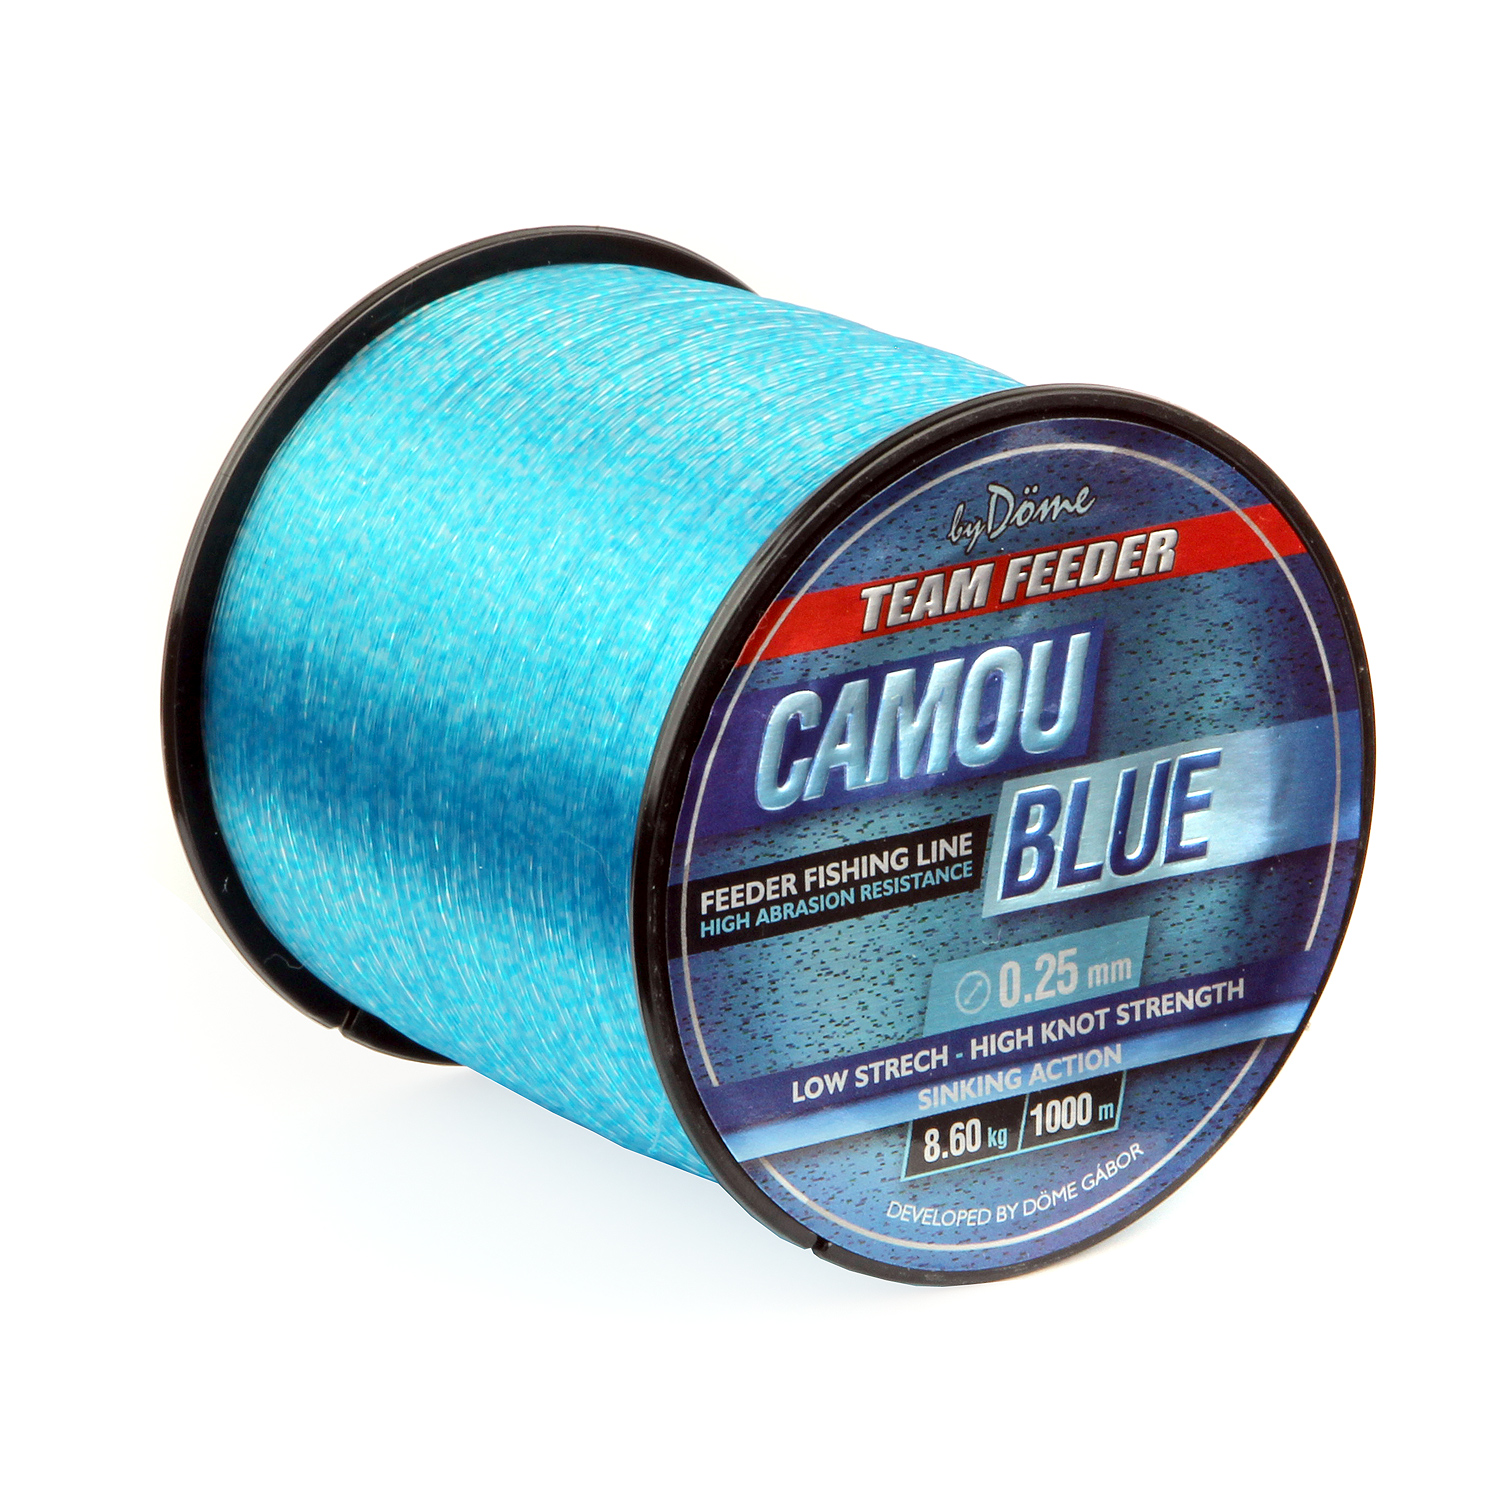 By Dme TF Camou Blue 1000m 0.30mm